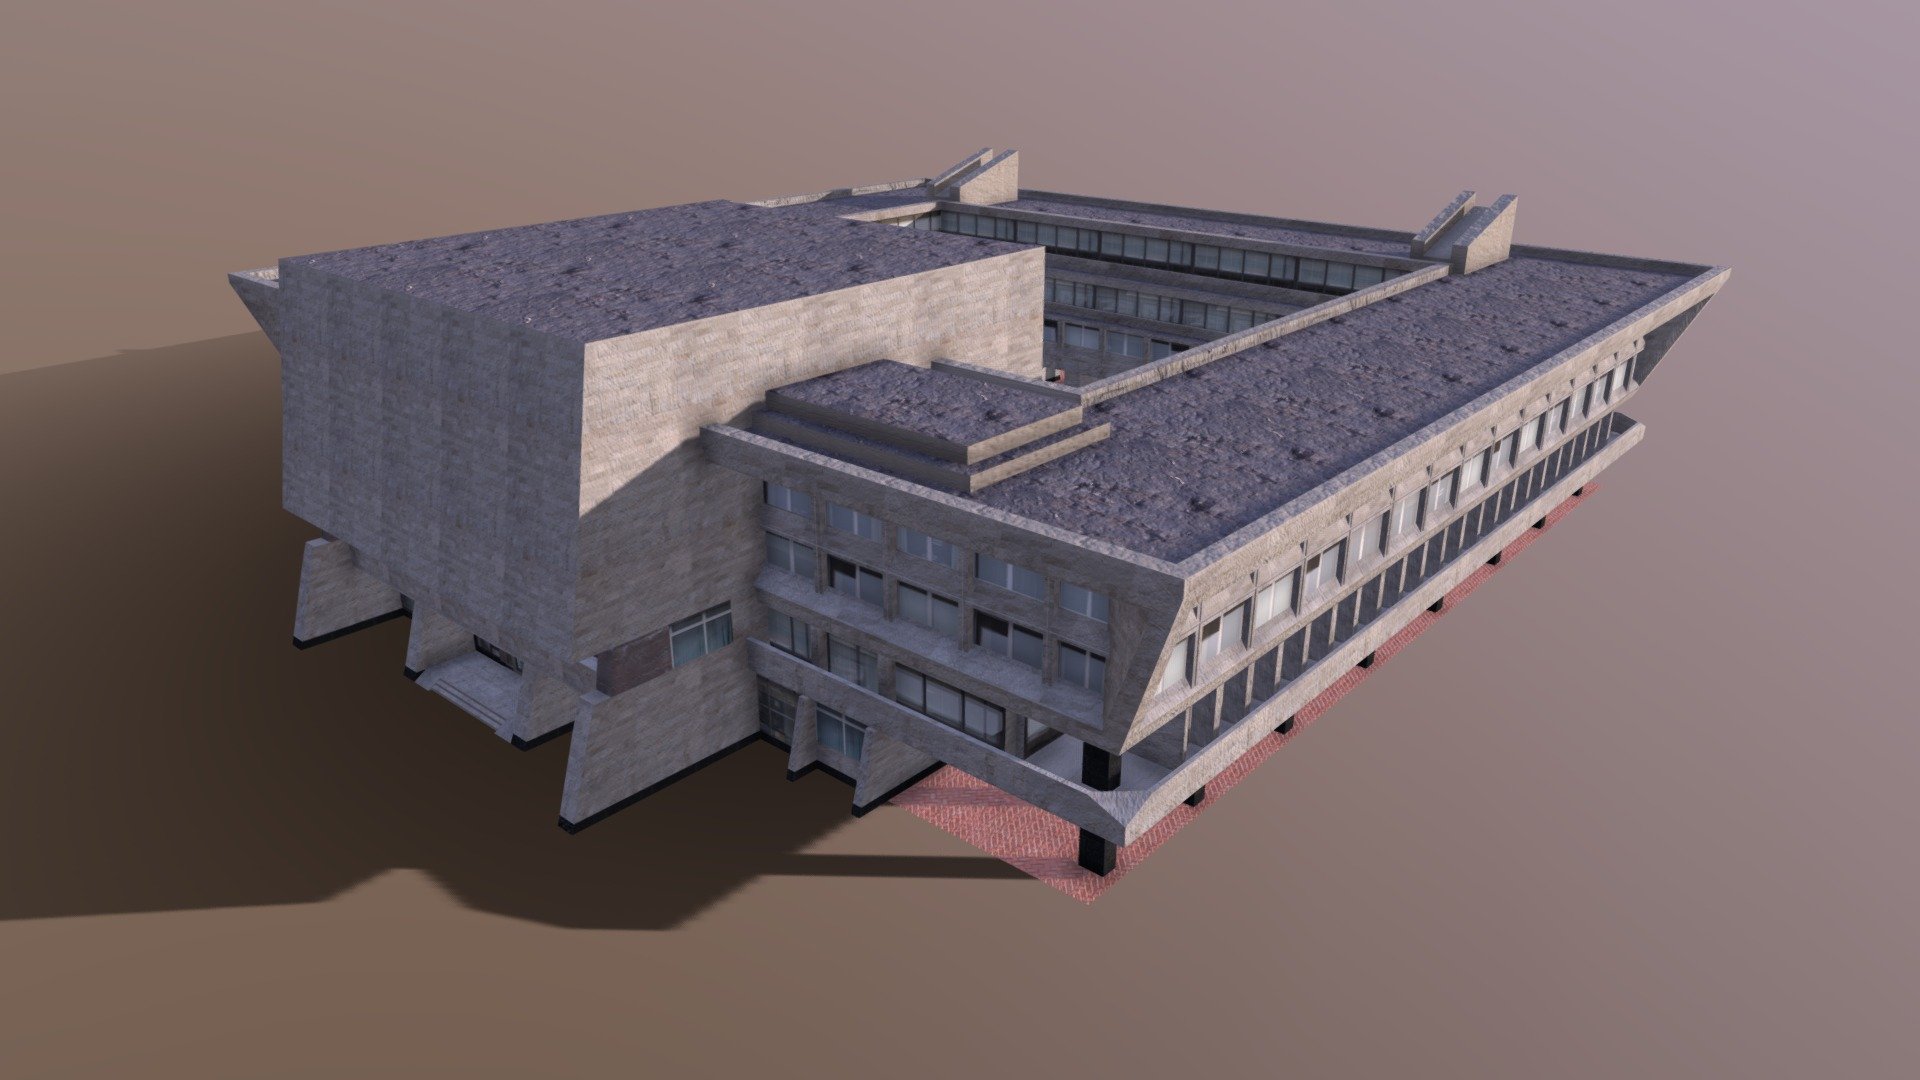 3D model of the soviet administrative building (city hall).

Low poly (game ready)

Polygons 7883

Verts 7480

With diffuse, specular and normal maps 3d model